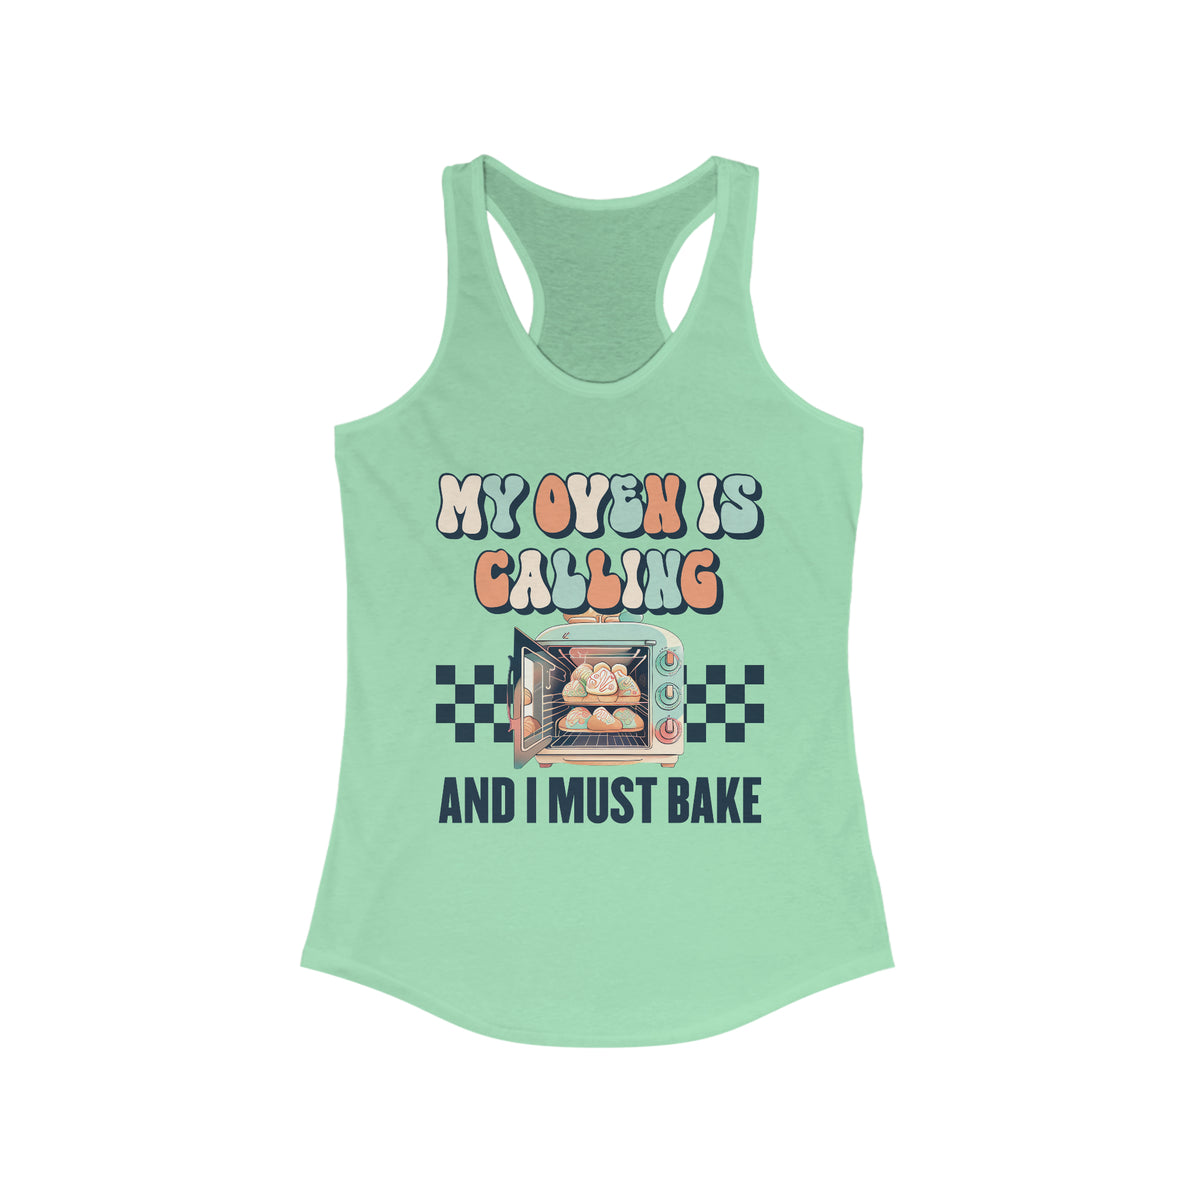 My Oven Is Calling Funny Baking Shirt | Cute Baking Gift For Her |  Women's Slim Fit Racerback Tank Top